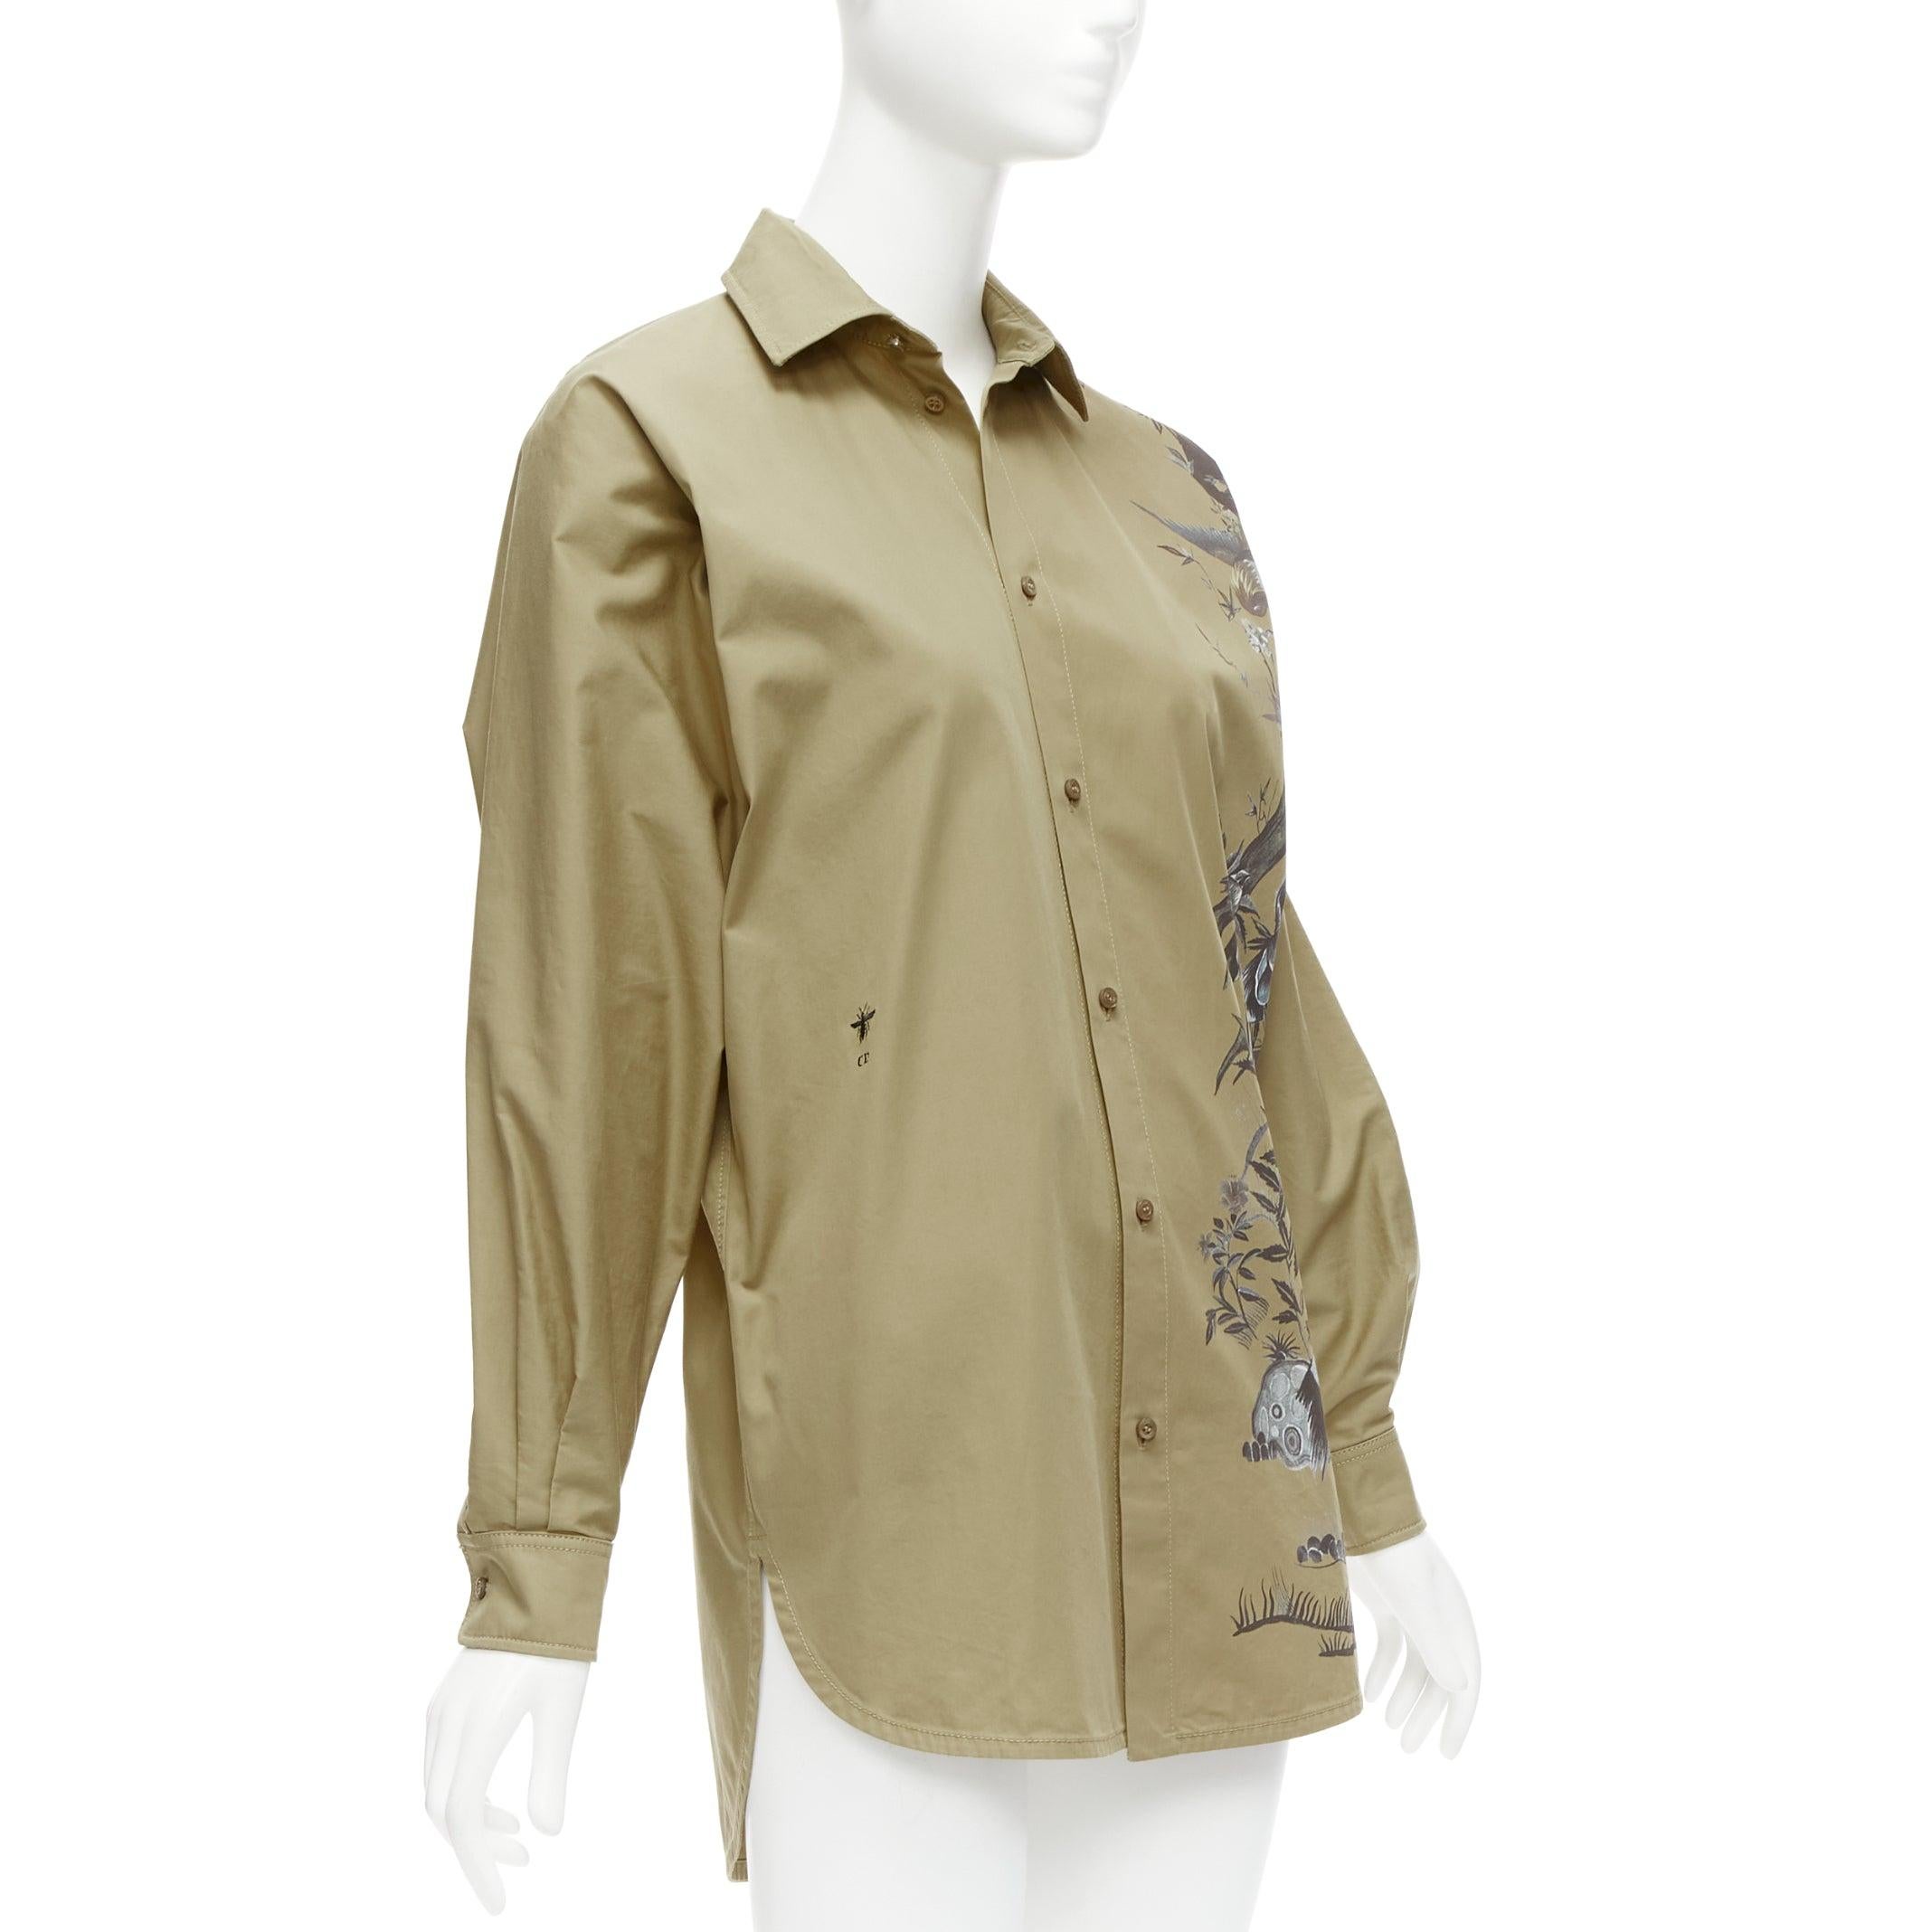 CHRISTIAN DIOR 2022 Jardin dhiver khaki bird flower dress shirt FR34 XS
Reference: AAWC/A00674
Brand: Dior
Designer: Maria Grazia Chiuri
Collection: 2022 Jardin dhiver
Material: Cotton
Color: Khaki
Pattern: Floral
Closure: Button
Extra Details: